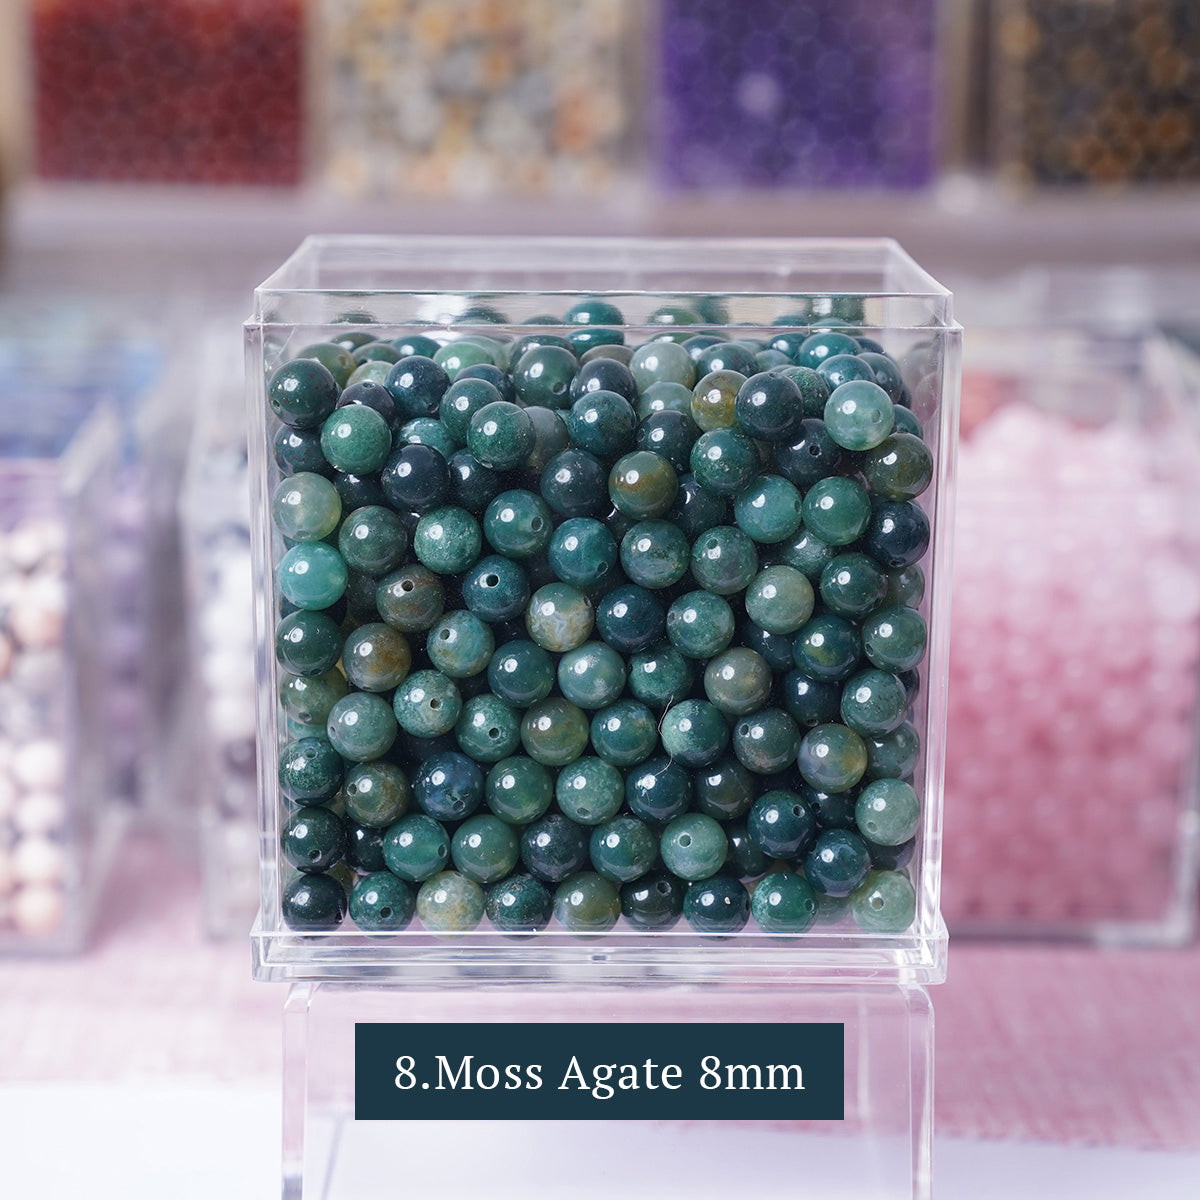 VIP-Highland Crystal DIY Beads for bracelets With Free Strings and needles